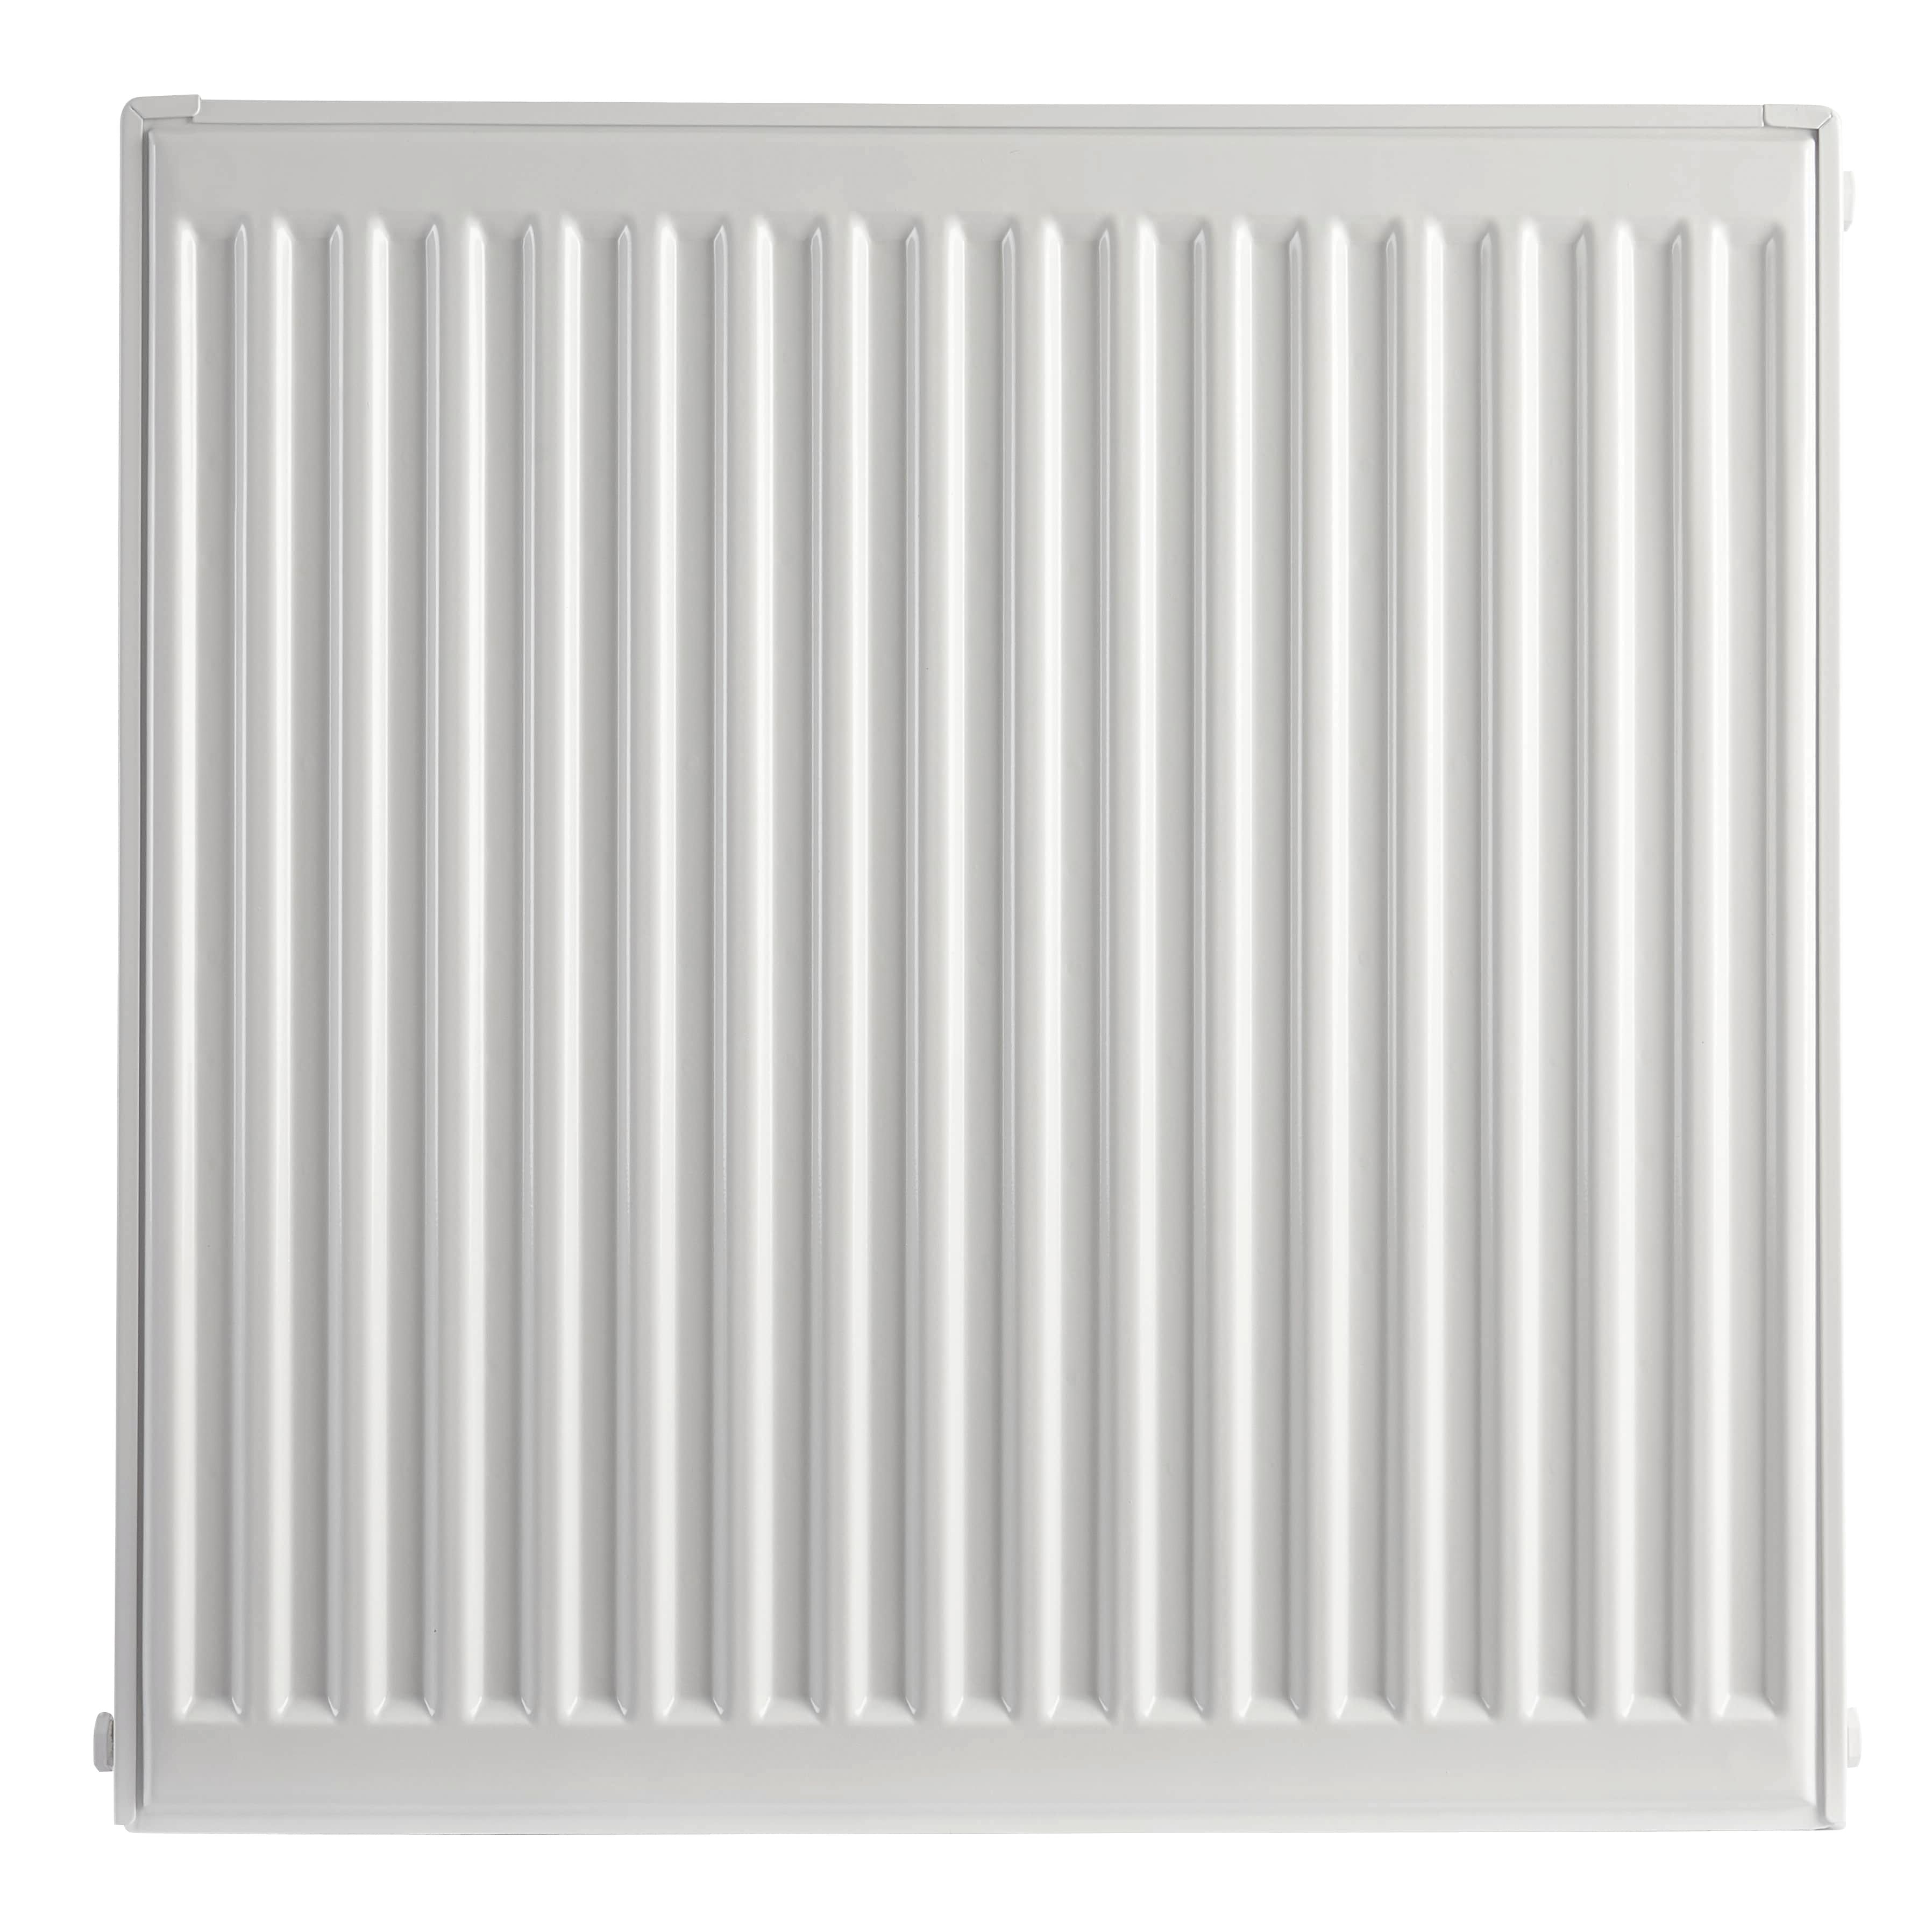 Image of Homeline by Stelrad 700 x 600mm Type 22 Double Panel Premium Double Convector Radiator